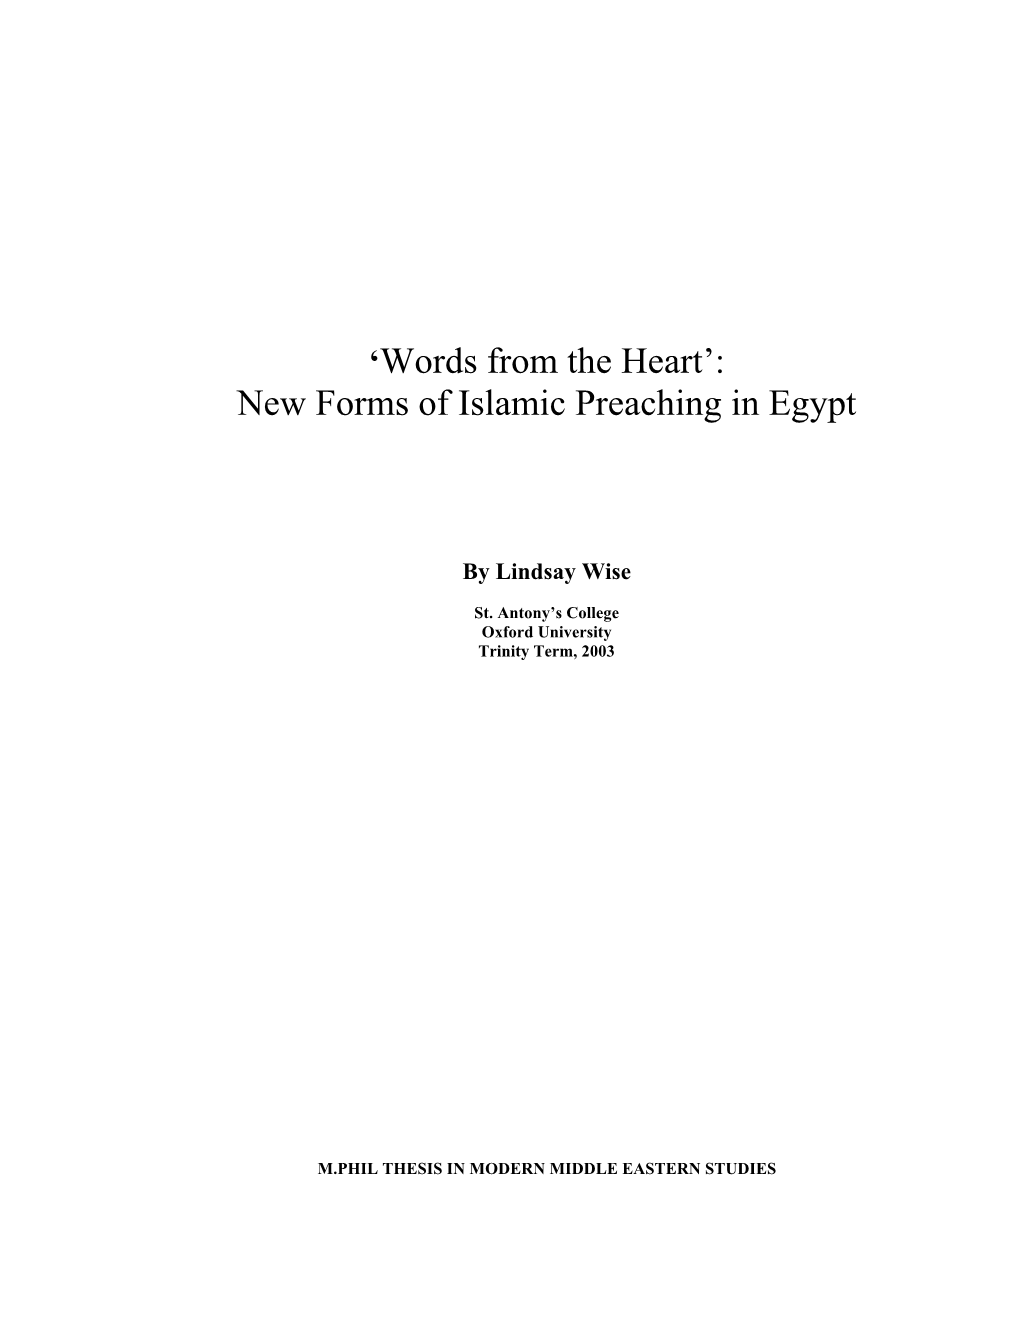 New Forms of Islamic Preaching in Egypt